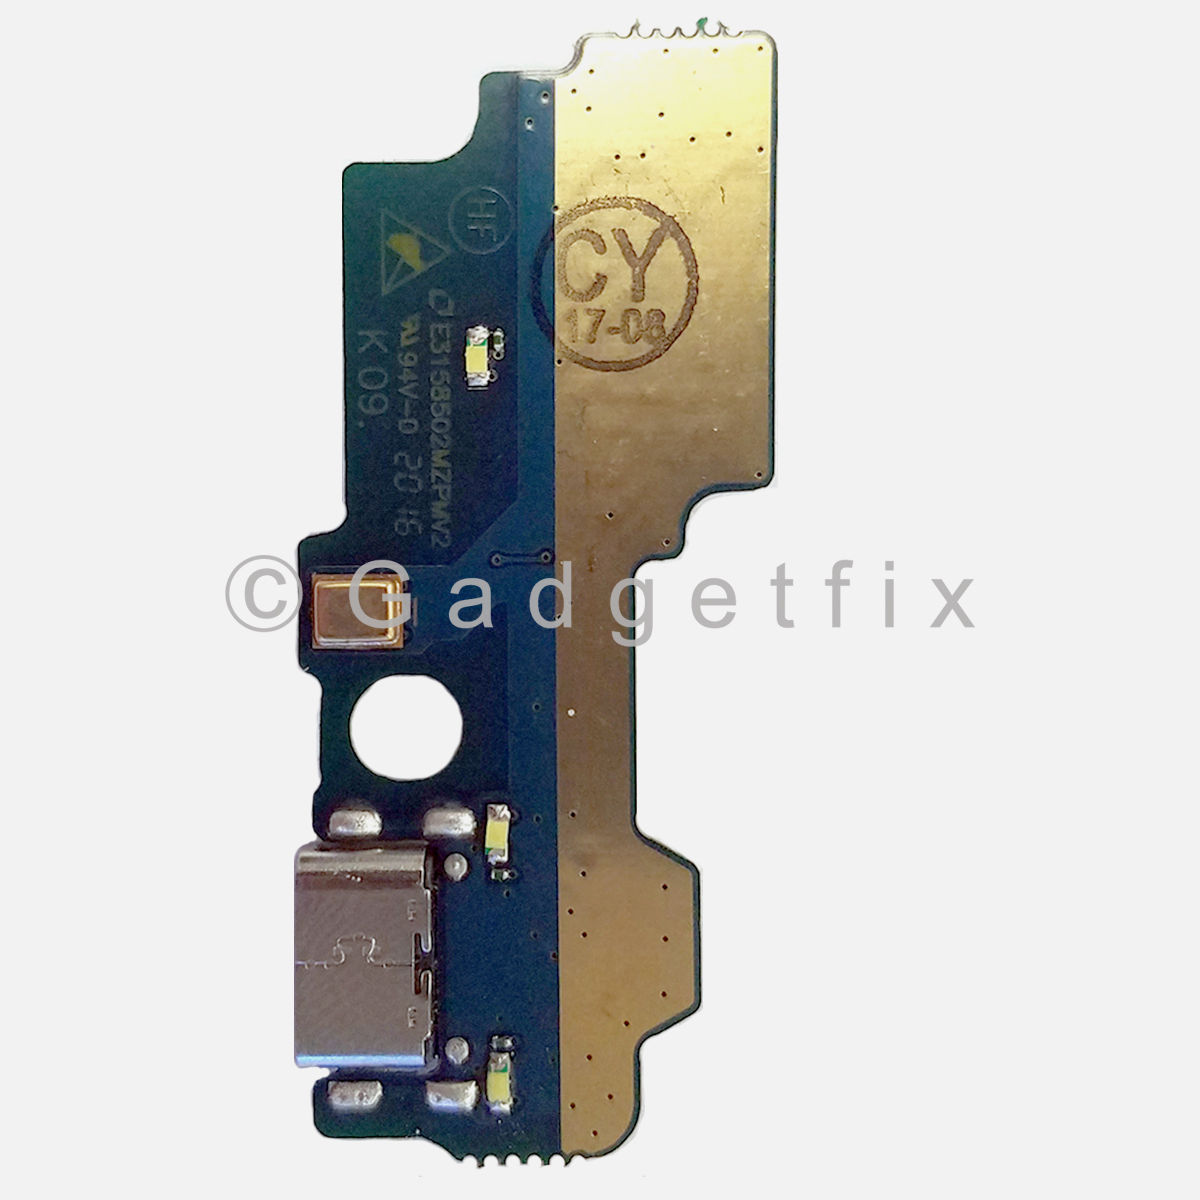 ZTE ZMAX Pro Z981 USB Charger Charging Port Dock Connector Flex Cable + Mic